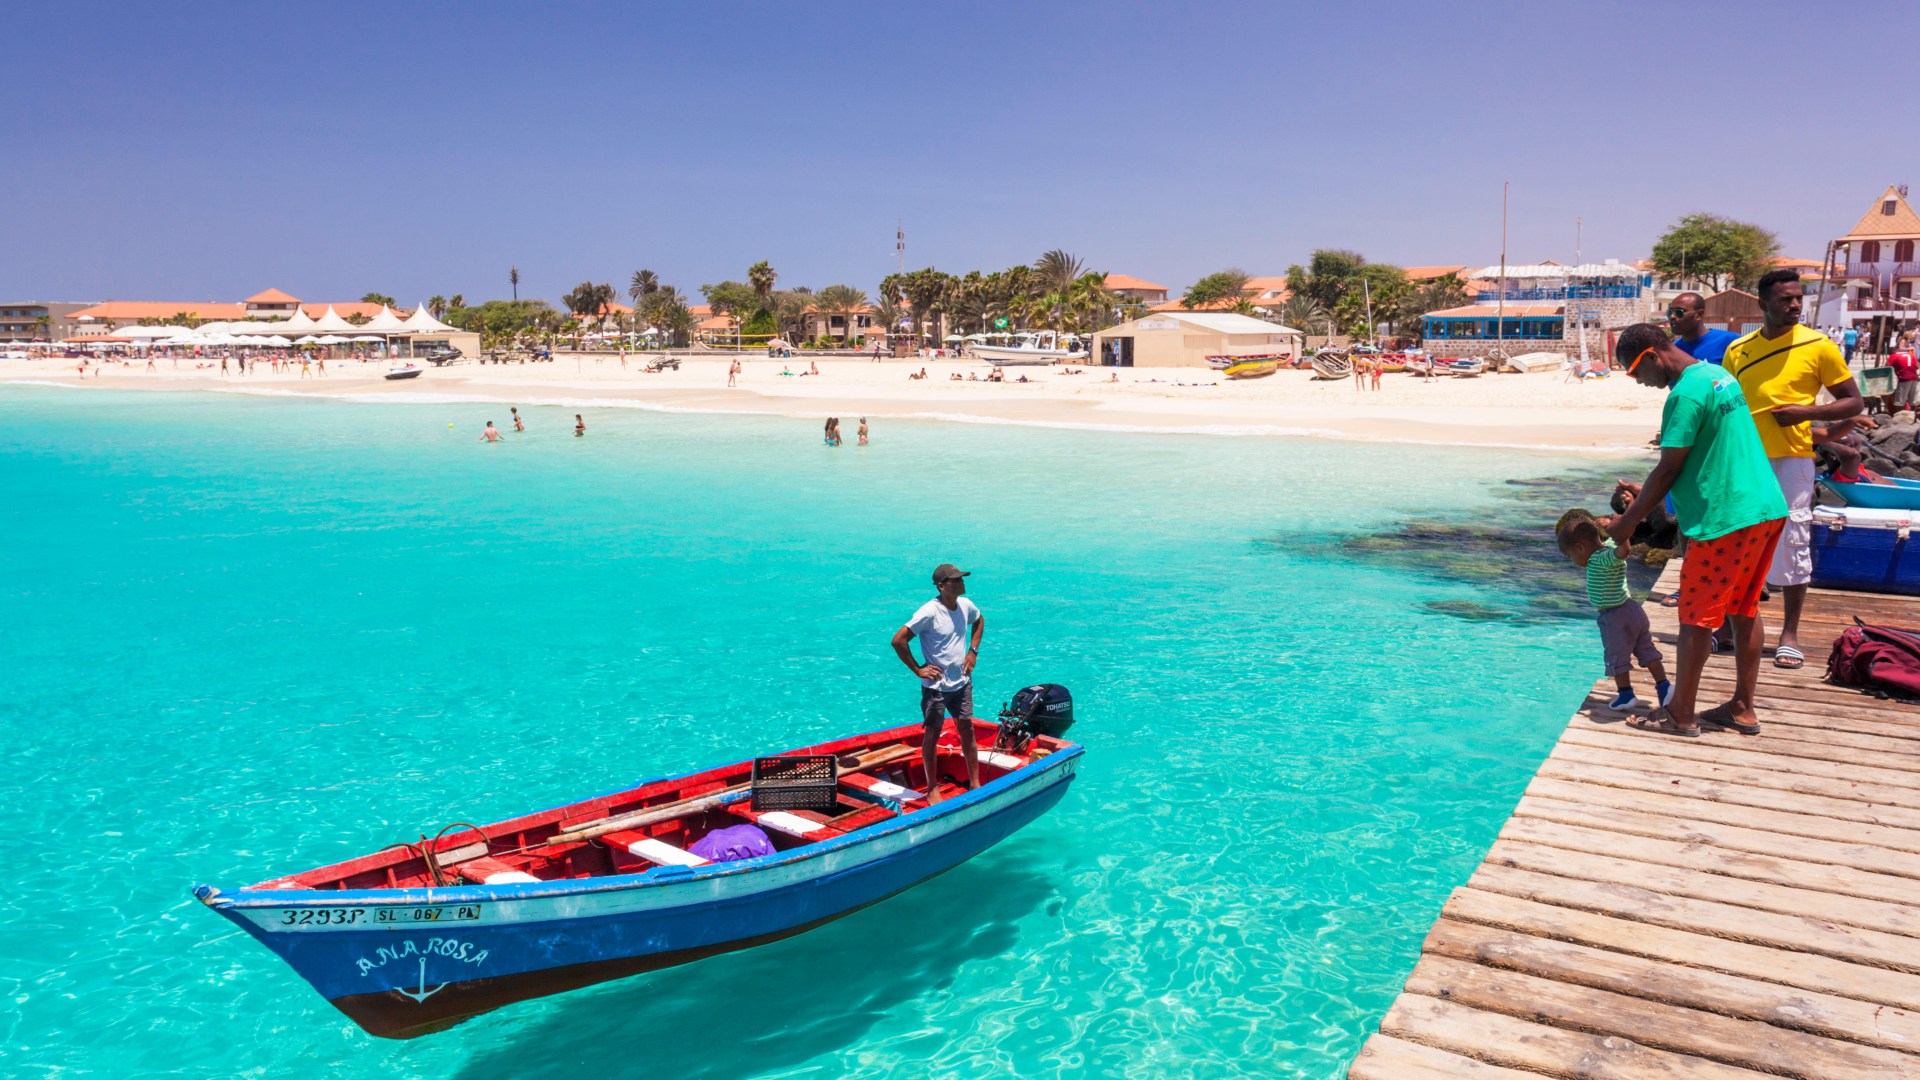 Discover the Best All-Inclusive Holiday Deals in Africa from £700pp – The Perfect Caribbean Alternative!